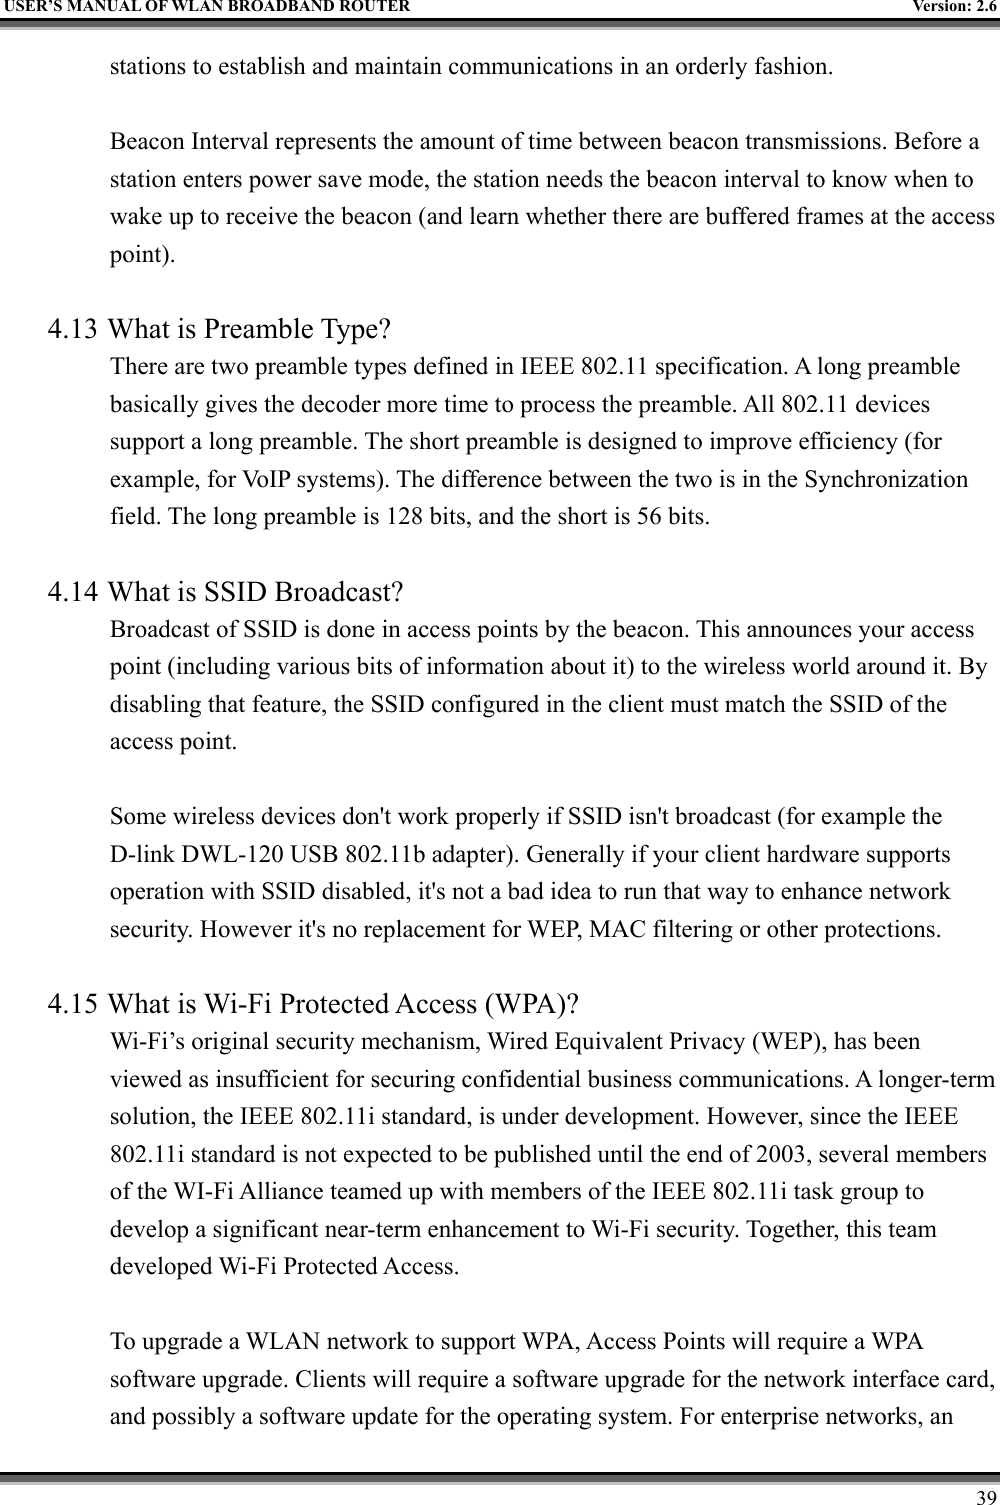   USER’S MANUAL OF WLAN BROADBAND ROUTER    Version: 2.6     39 stations to establish and maintain communications in an orderly fashion.  Beacon Interval represents the amount of time between beacon transmissions. Before a station enters power save mode, the station needs the beacon interval to know when to wake up to receive the beacon (and learn whether there are buffered frames at the access point).  4.13 What is Preamble Type?   There are two preamble types defined in IEEE 802.11 specification. A long preamble basically gives the decoder more time to process the preamble. All 802.11 devices support a long preamble. The short preamble is designed to improve efficiency (for example, for VoIP systems). The difference between the two is in the Synchronization field. The long preamble is 128 bits, and the short is 56 bits.    4.14 What is SSID Broadcast?   Broadcast of SSID is done in access points by the beacon. This announces your access point (including various bits of information about it) to the wireless world around it. By disabling that feature, the SSID configured in the client must match the SSID of the access point.  Some wireless devices don&apos;t work properly if SSID isn&apos;t broadcast (for example the D-link DWL-120 USB 802.11b adapter). Generally if your client hardware supports operation with SSID disabled, it&apos;s not a bad idea to run that way to enhance network security. However it&apos;s no replacement for WEP, MAC filtering or other protections.    4.15 What is Wi-Fi Protected Access (WPA)?   Wi-Fi’s original security mechanism, Wired Equivalent Privacy (WEP), has been viewed as insufficient for securing confidential business communications. A longer-term solution, the IEEE 802.11i standard, is under development. However, since the IEEE 802.11i standard is not expected to be published until the end of 2003, several members of the WI-Fi Alliance teamed up with members of the IEEE 802.11i task group to develop a significant near-term enhancement to Wi-Fi security. Together, this team developed Wi-Fi Protected Access.  To upgrade a WLAN network to support WPA, Access Points will require a WPA software upgrade. Clients will require a software upgrade for the network interface card, and possibly a software update for the operating system. For enterprise networks, an 